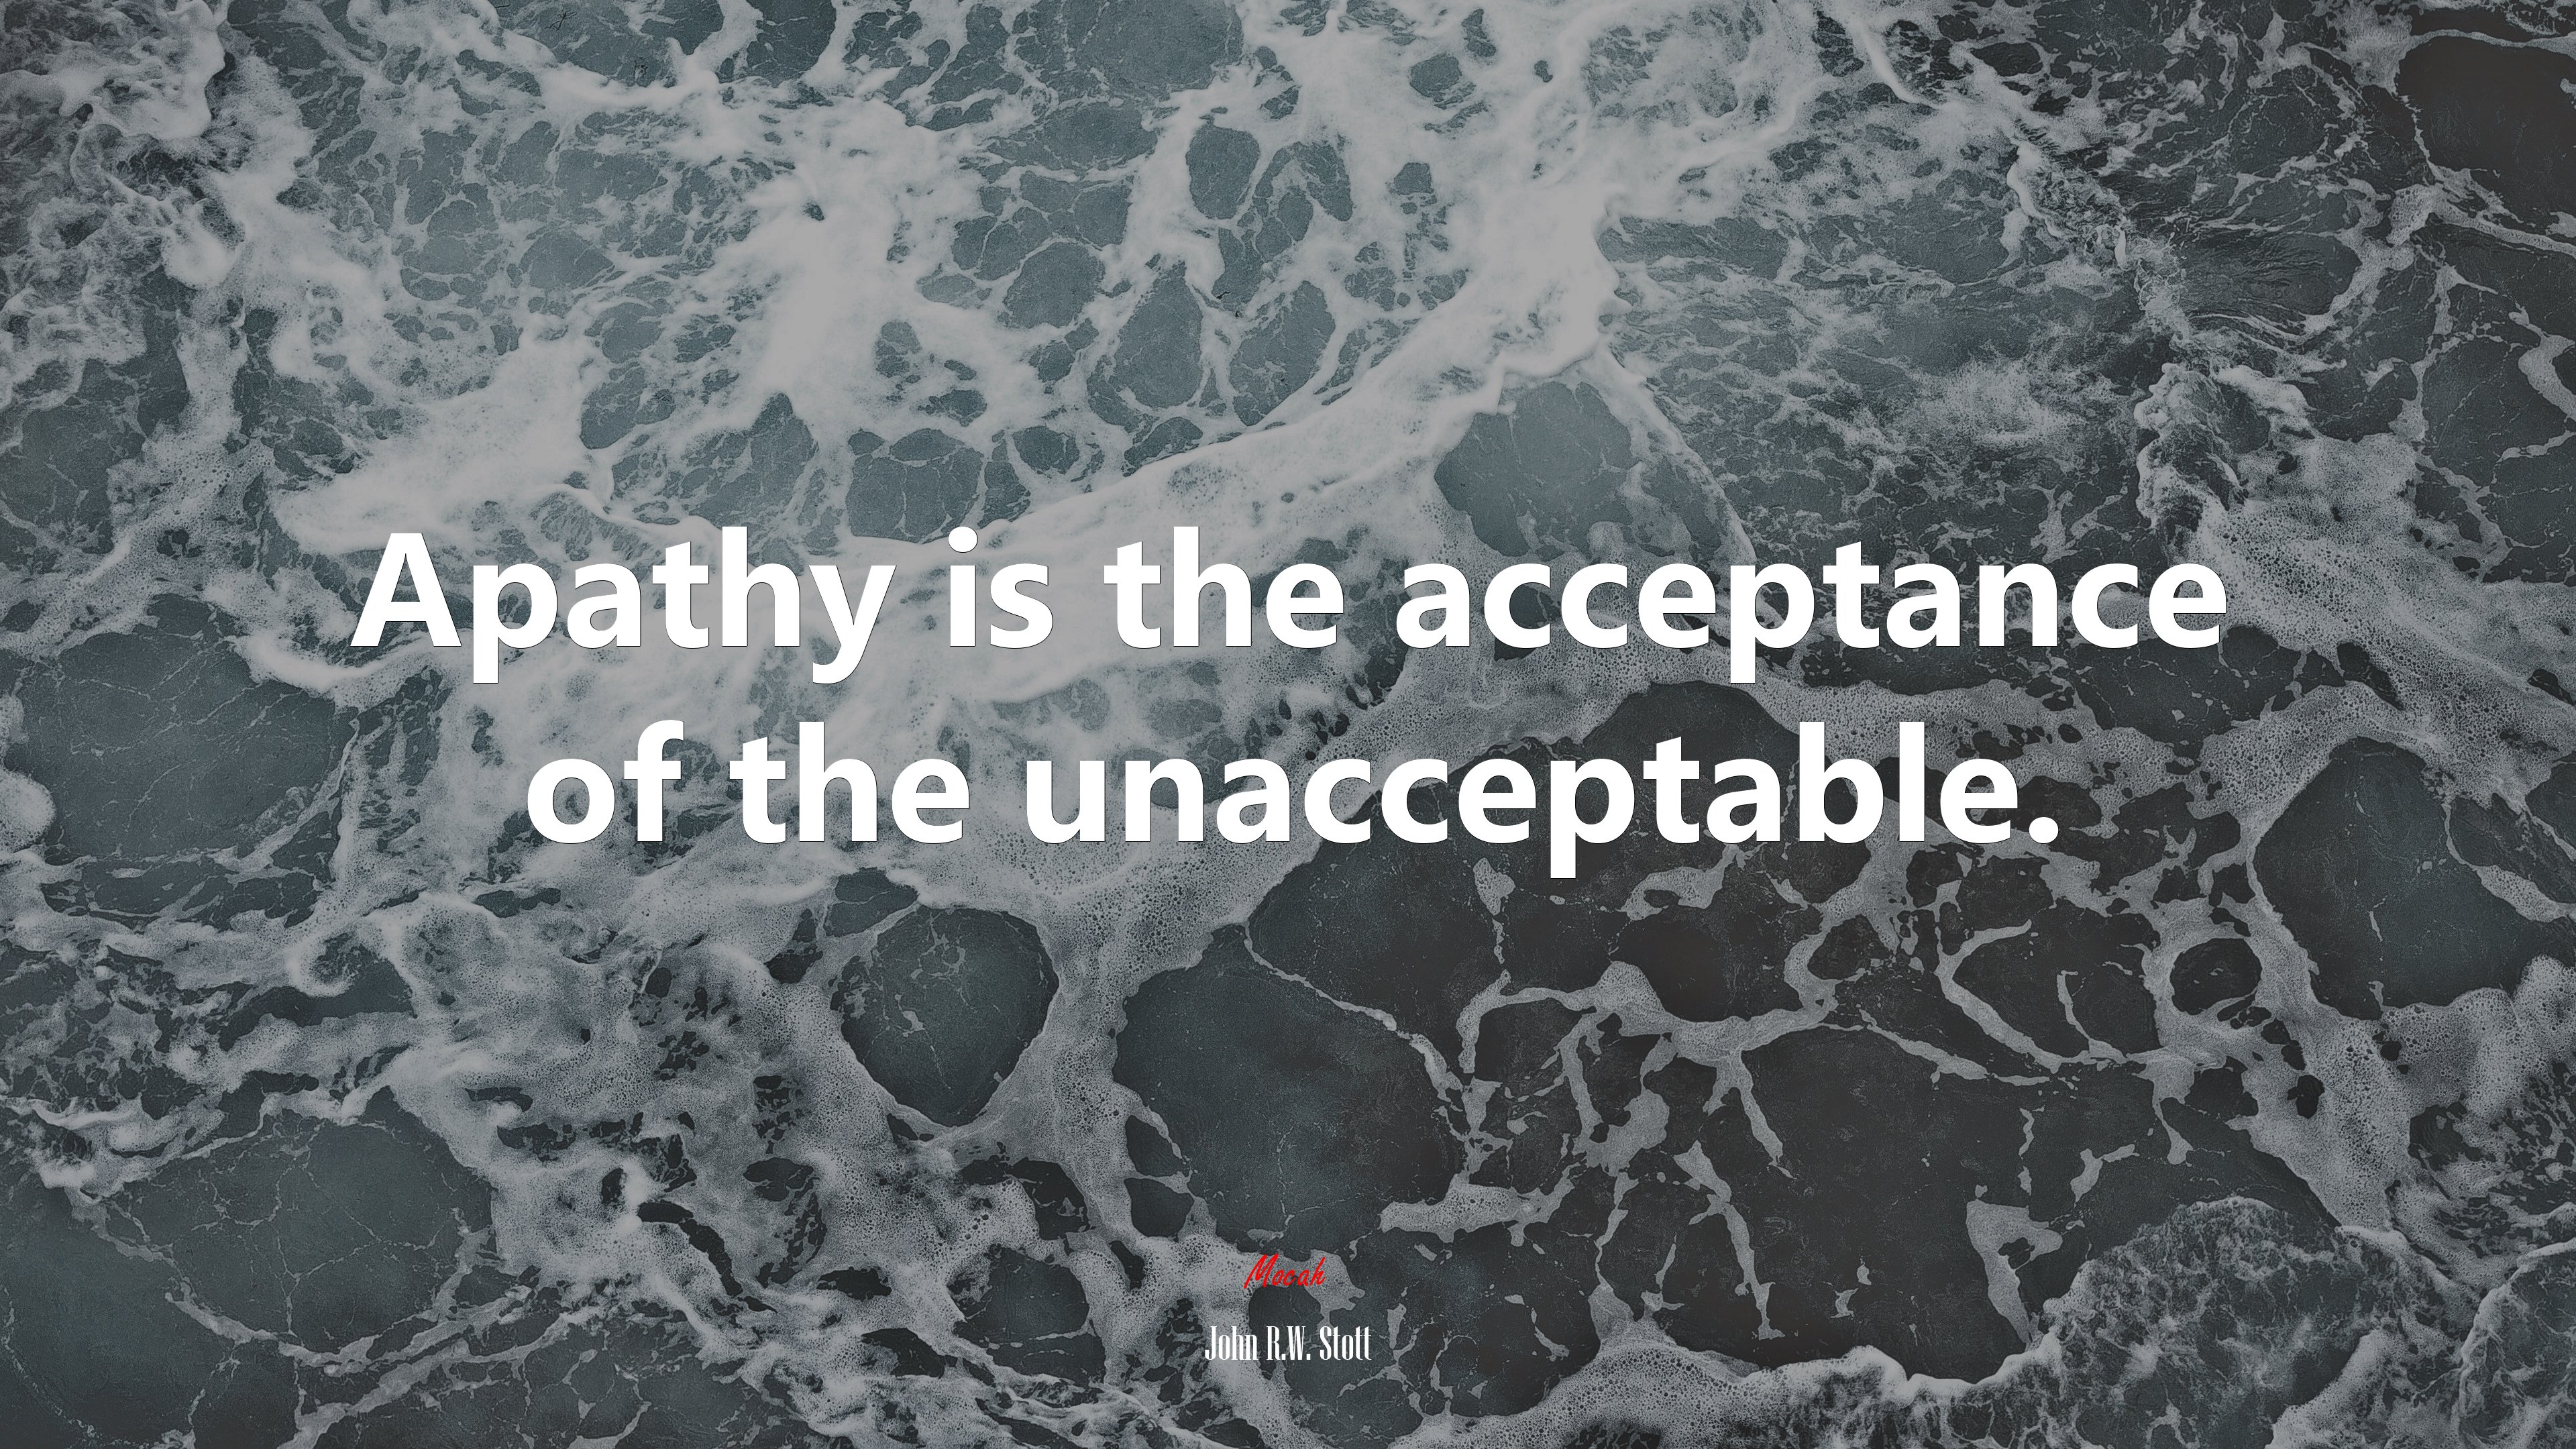 Apathy is the acceptance of the unacceptable. John R.W. Stott quote Gallery HD Wallpaper